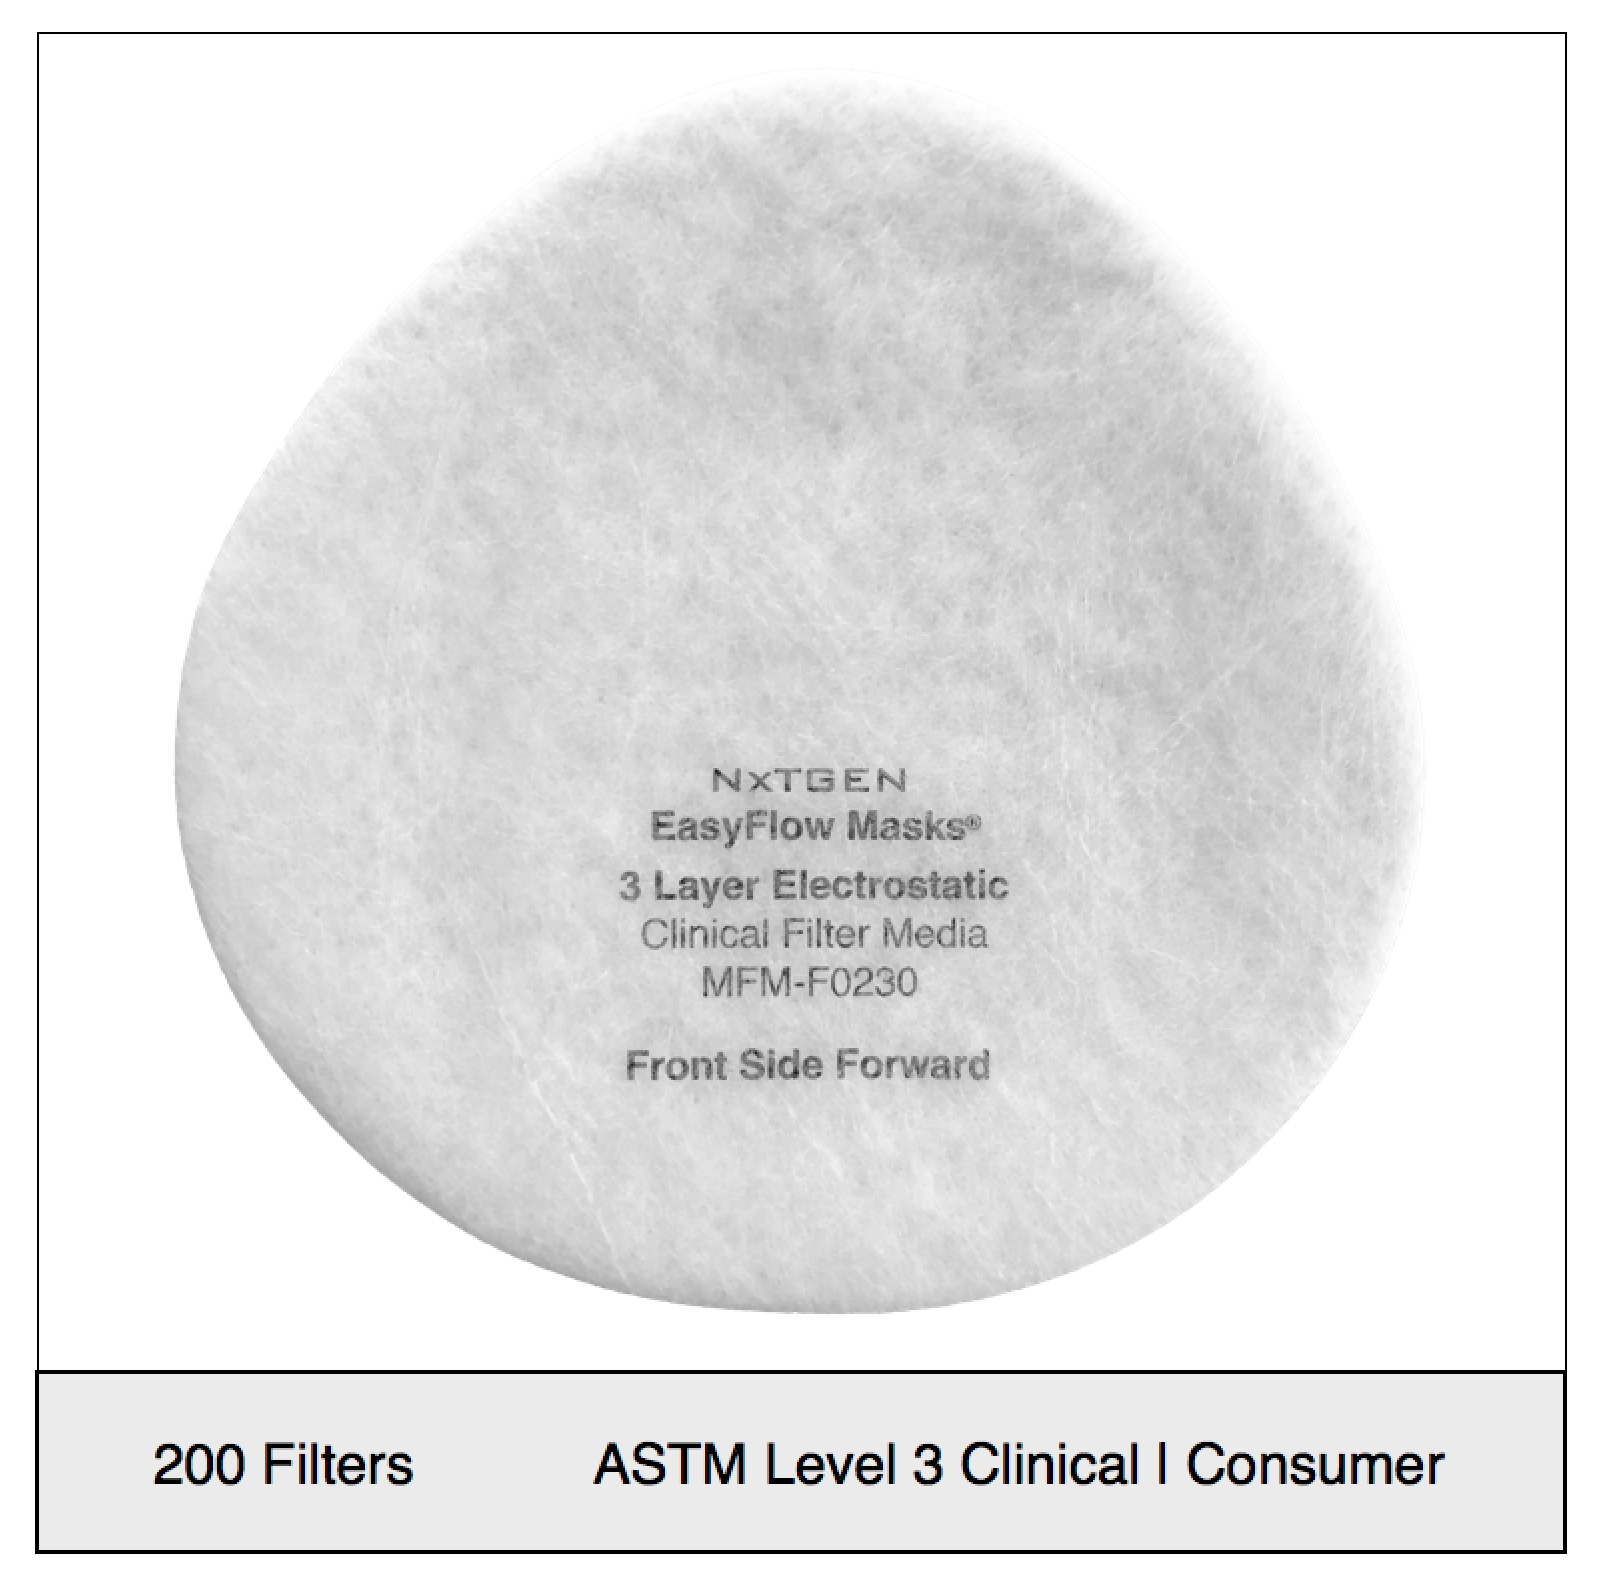 ASTM Level 3 Clinical | Consumer filter Set (200 qty)